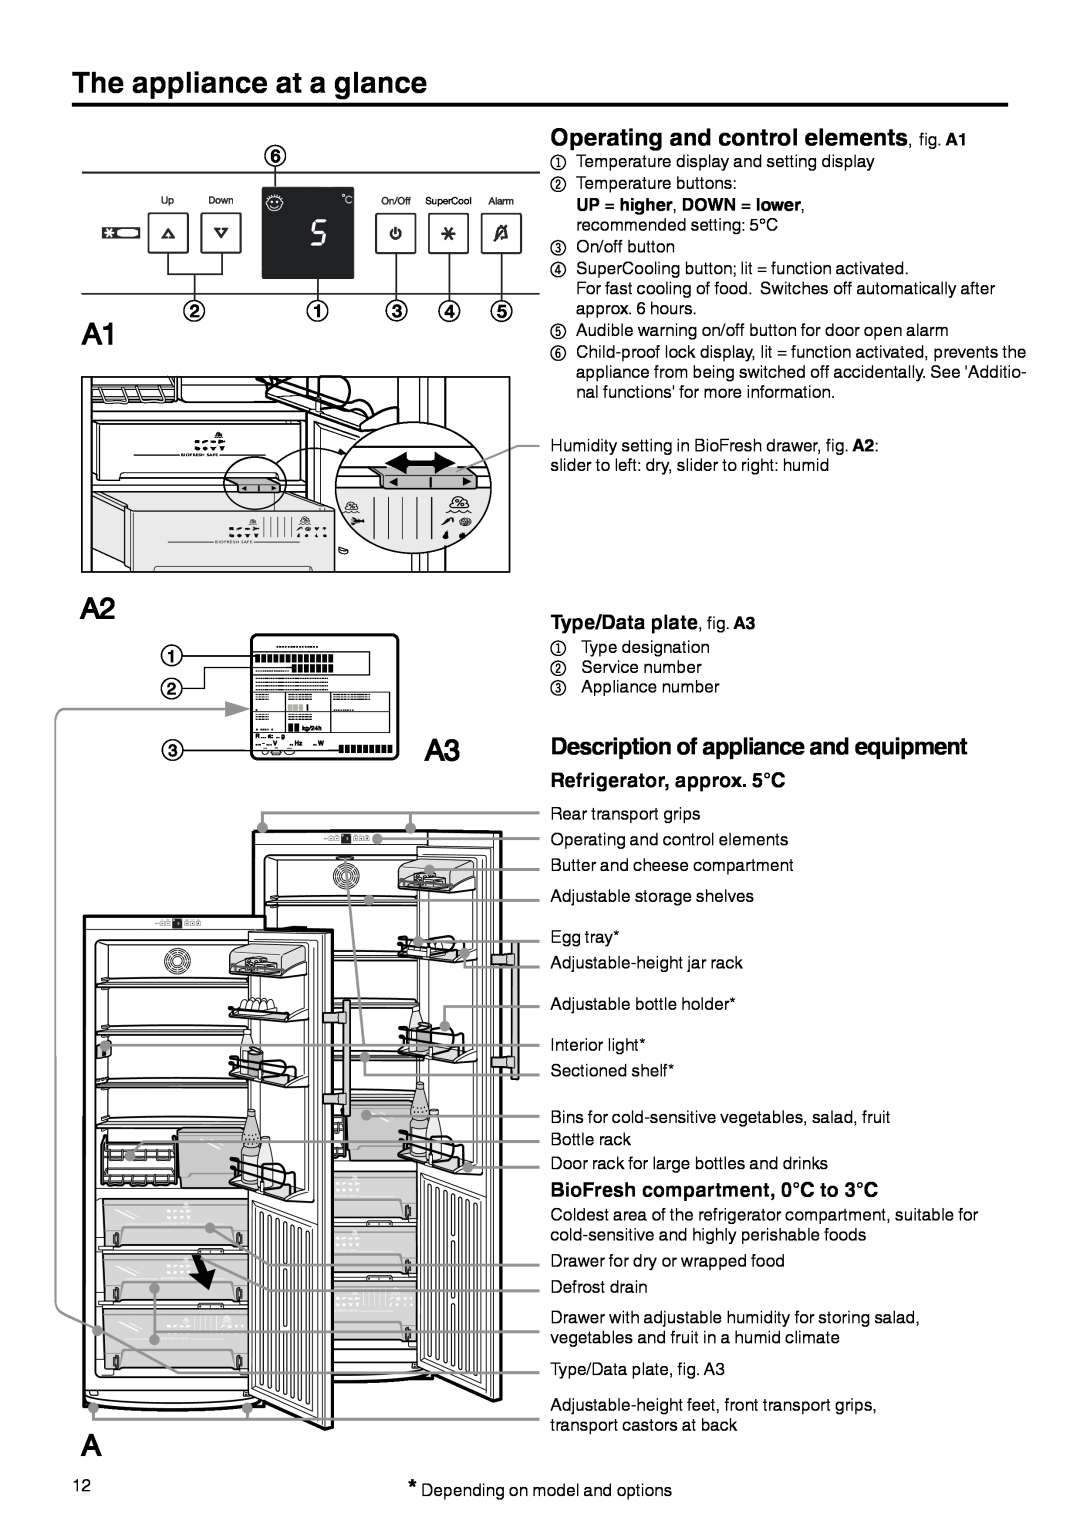 Liebherr 7082 212-02 manual The appliance at a glance, Operating and control elements, fig. A1, Type/Data plate, fig. A3 